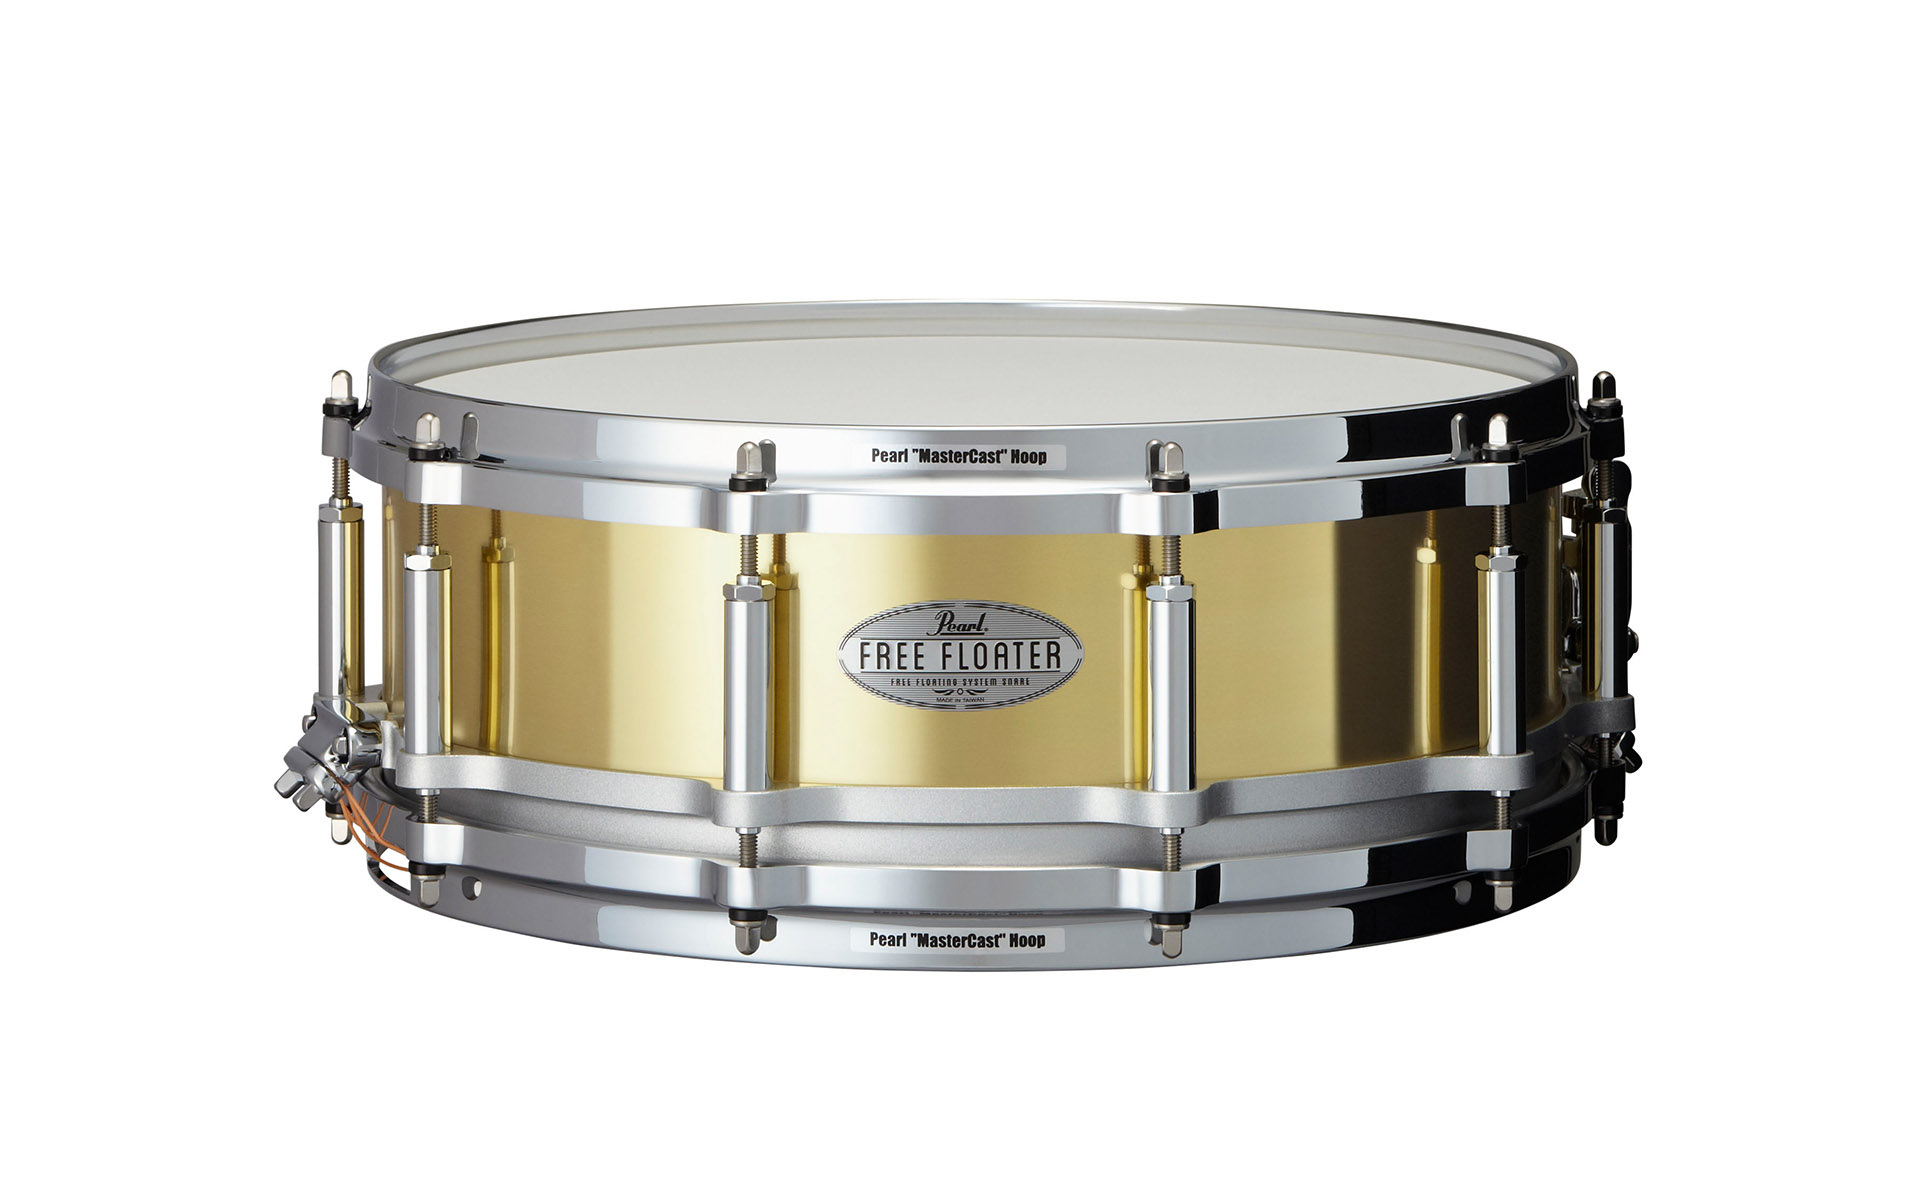 Pearl Brass Snare Drum, 3D CAD Model Library